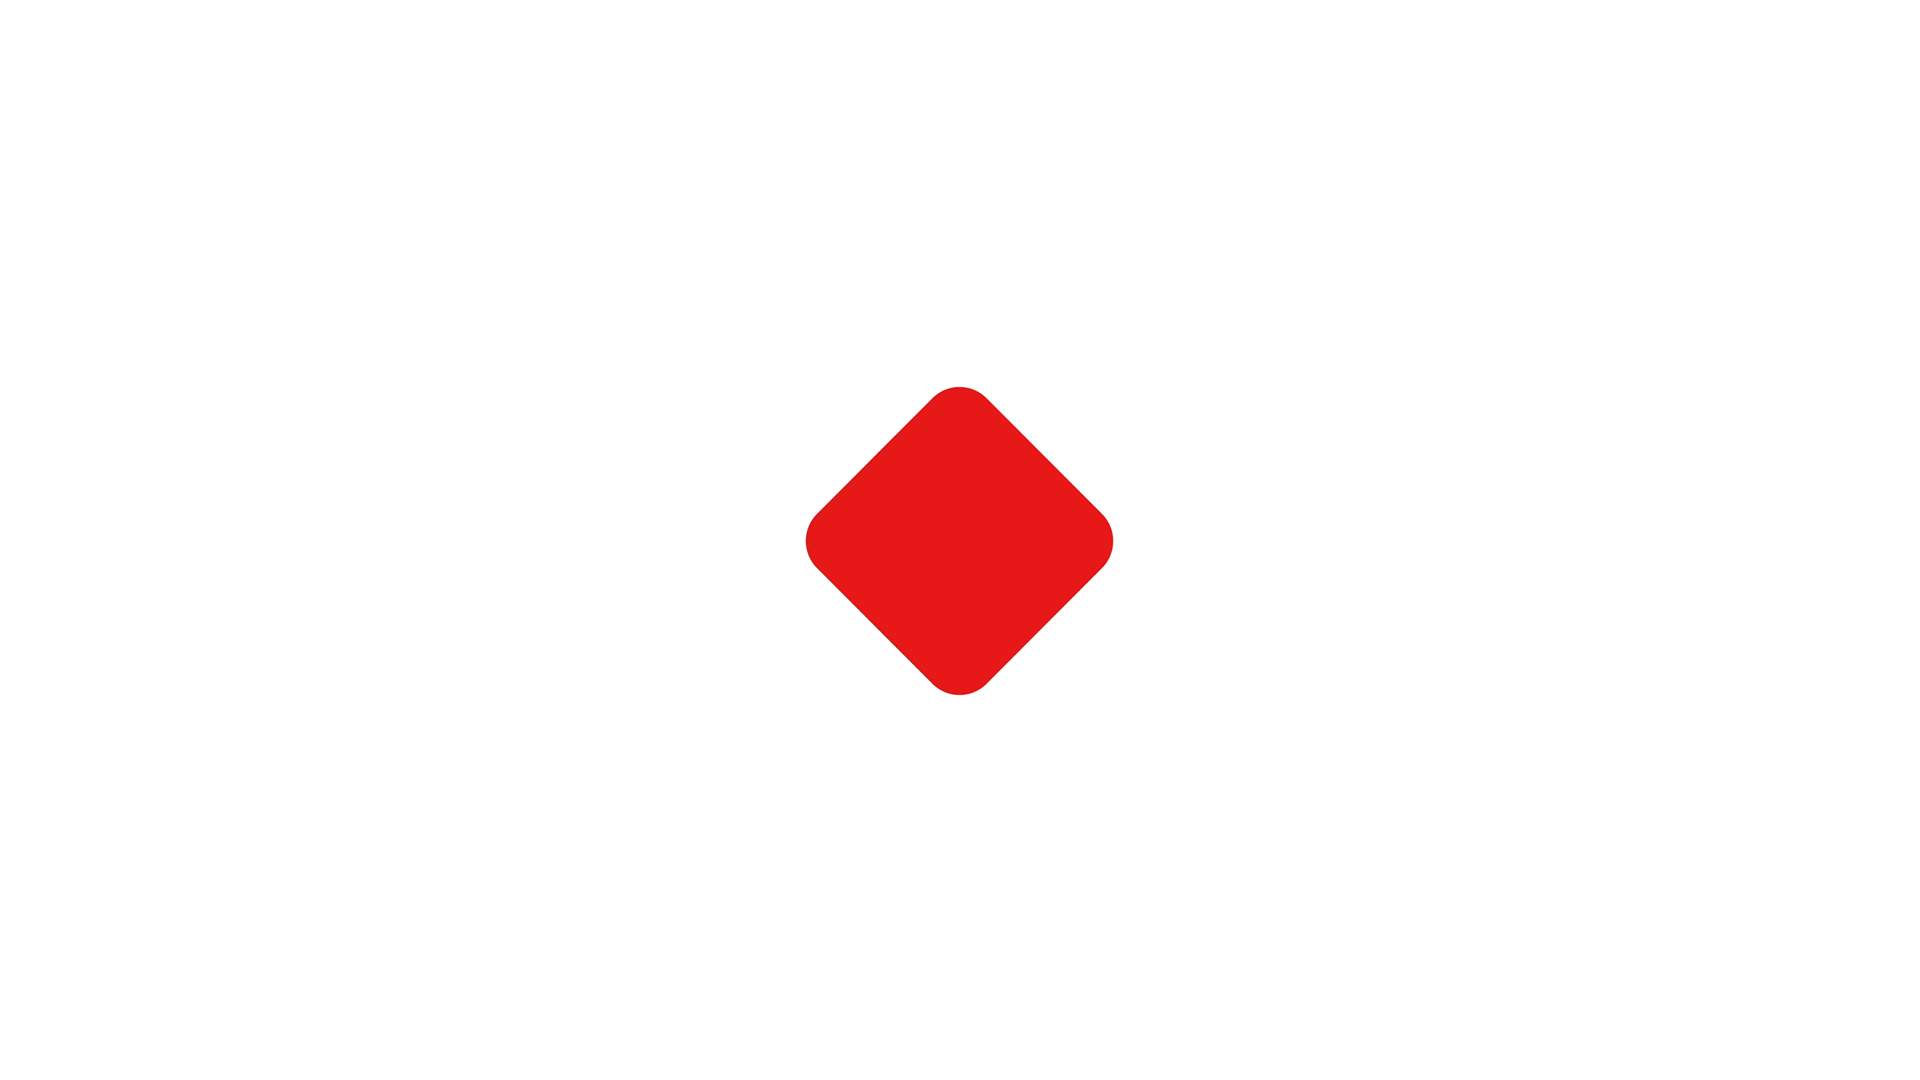 Is That Red Diamond Shape Logo - Brand New: New Logo and Identity for Bank Hapoalim by Open